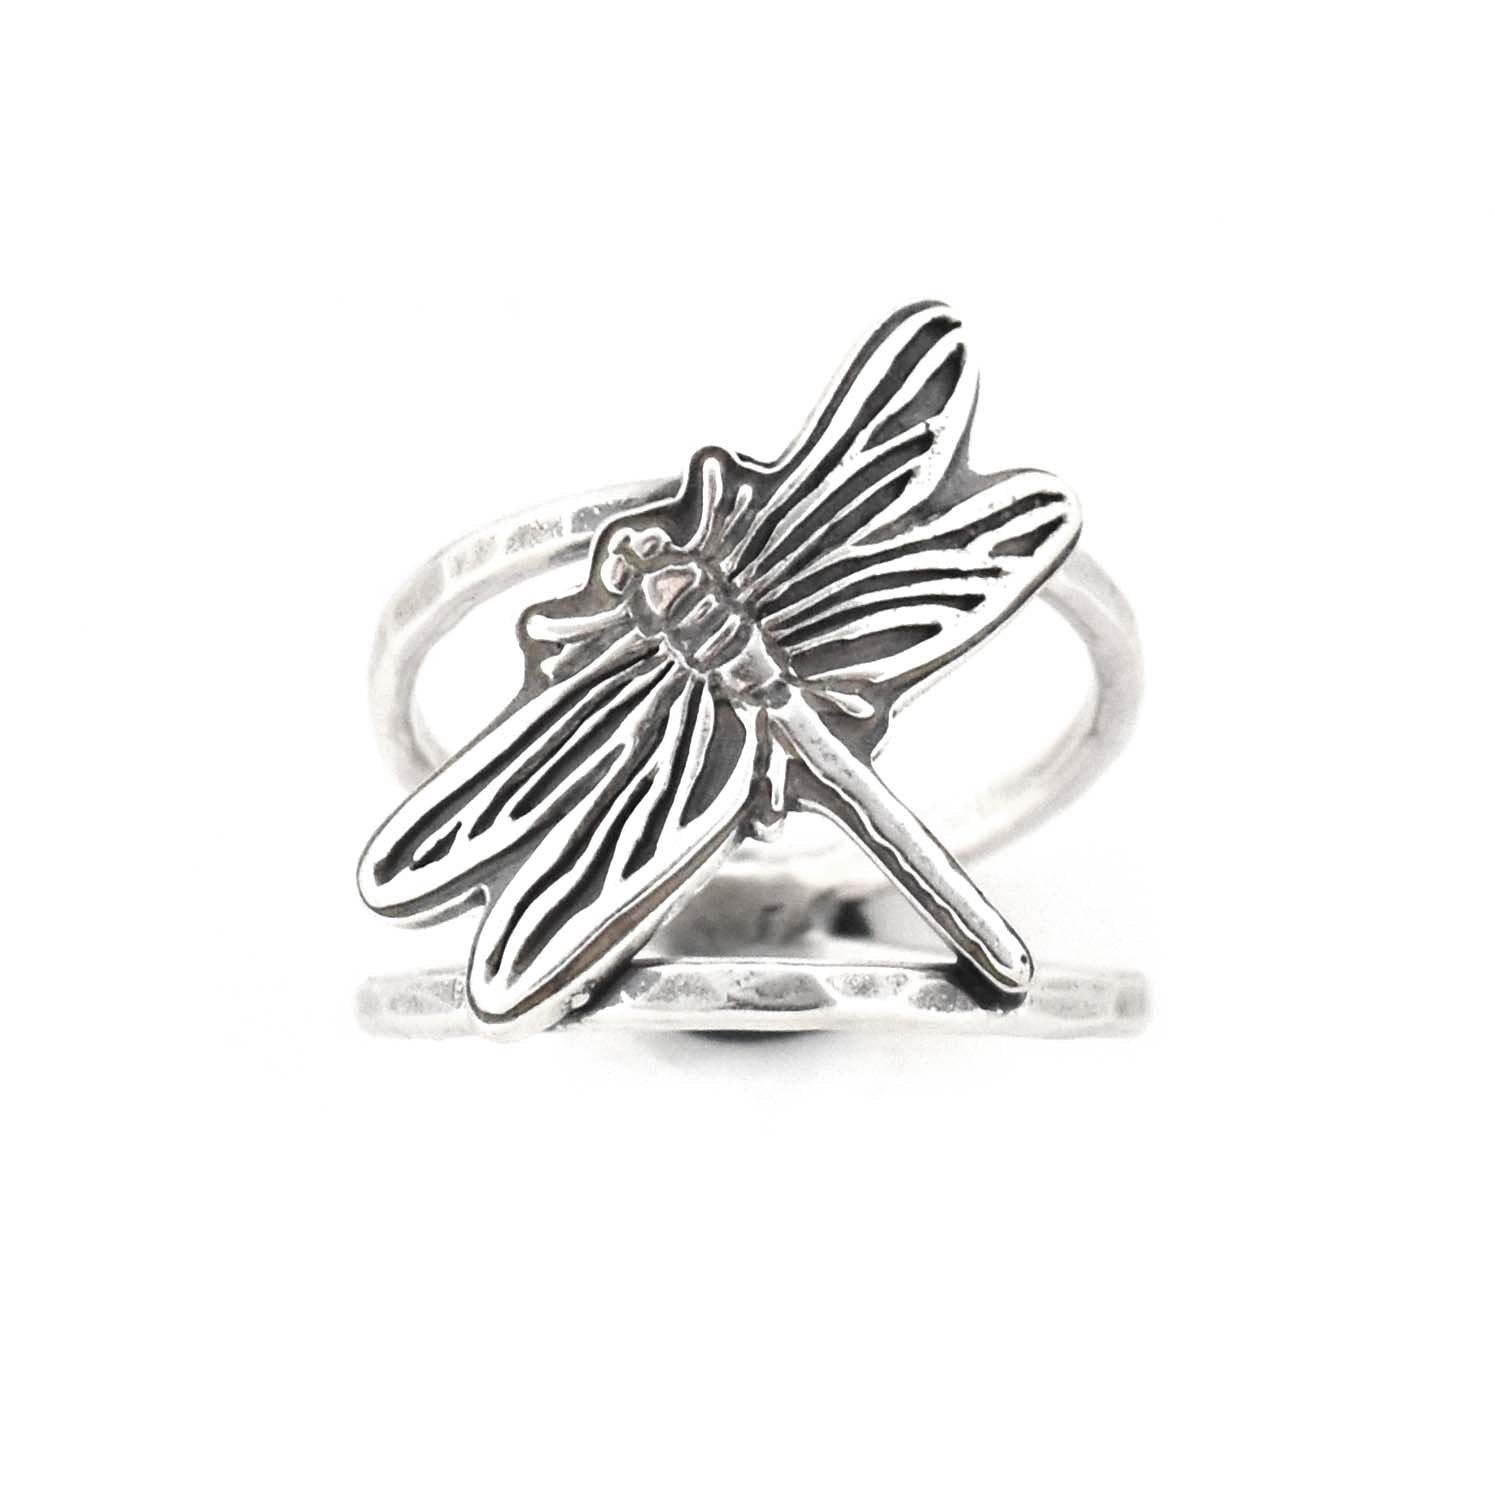 Dragonfly Ring - Ring  Select Size  4 5588 - handmade by Beth Millner Jewelry